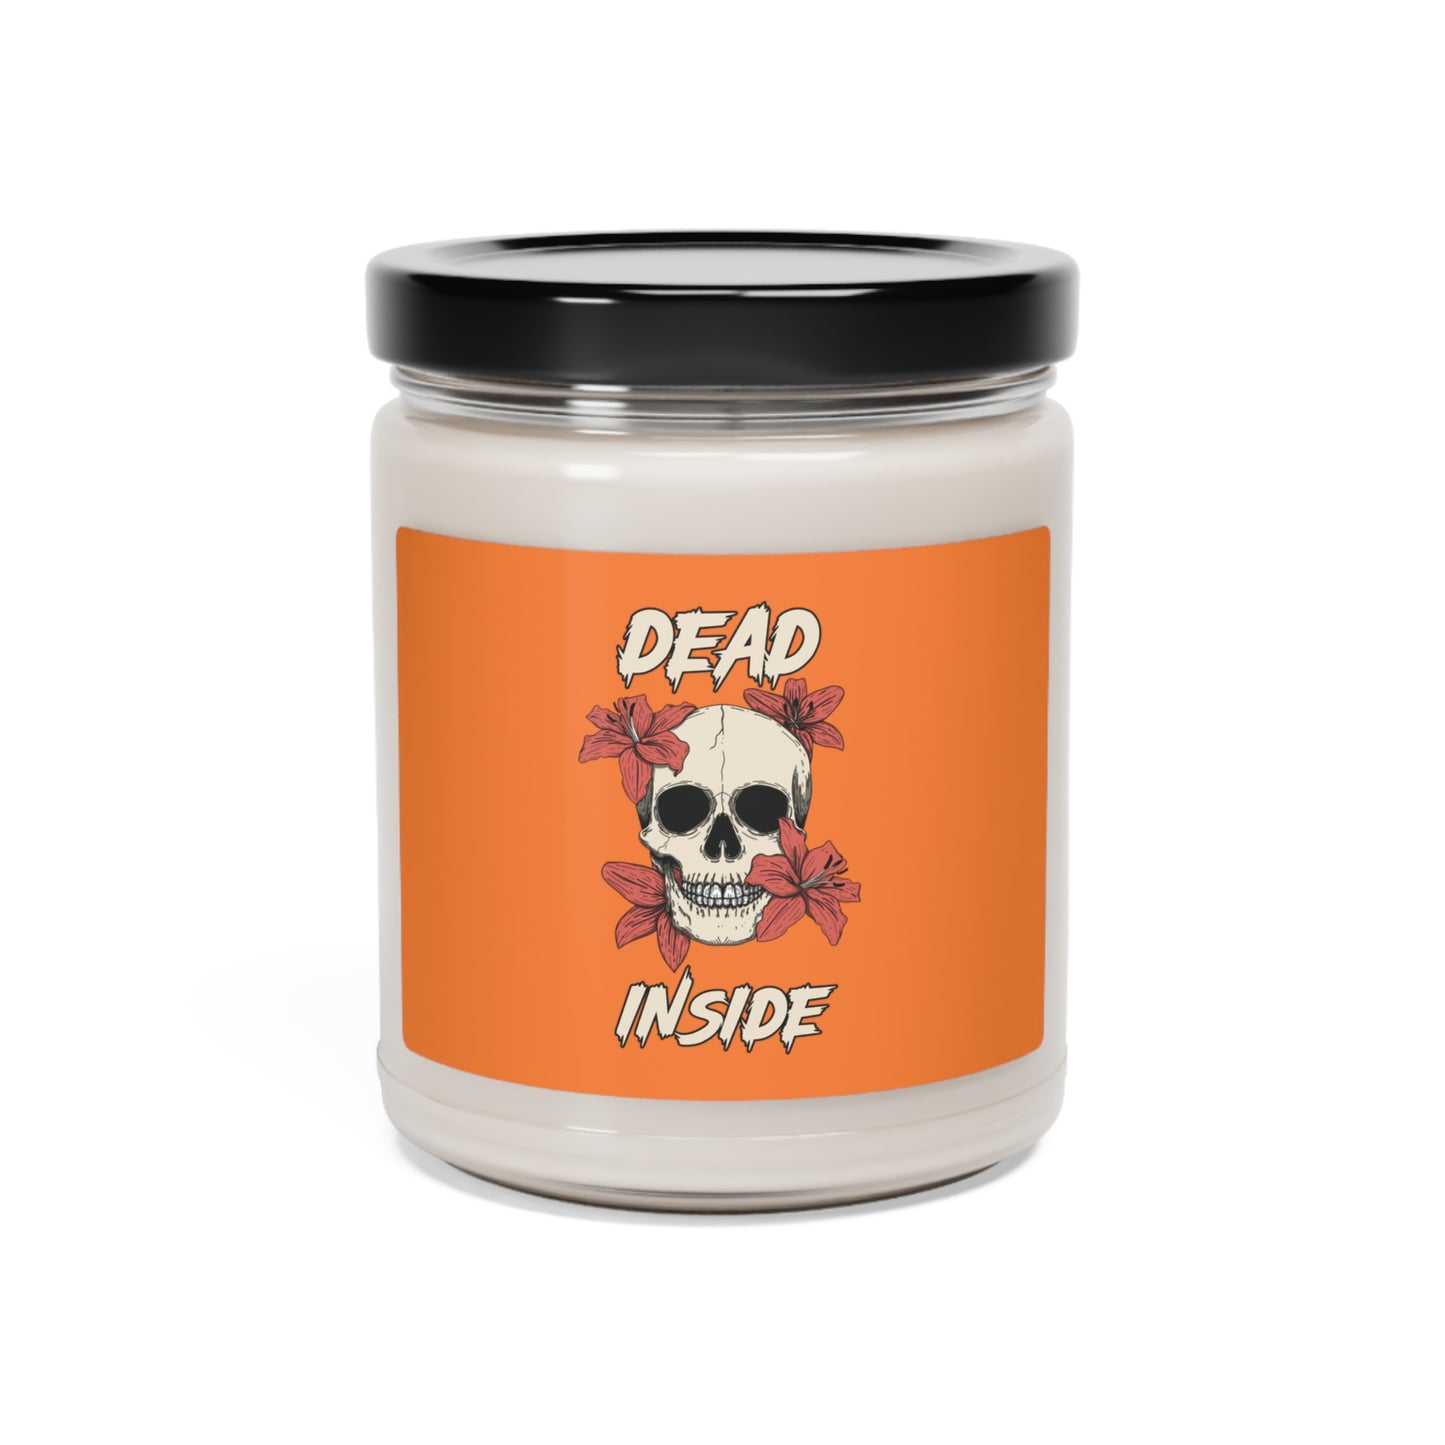 Candle - Sarcastic - Dead Inside - Soy Candle, 9oz